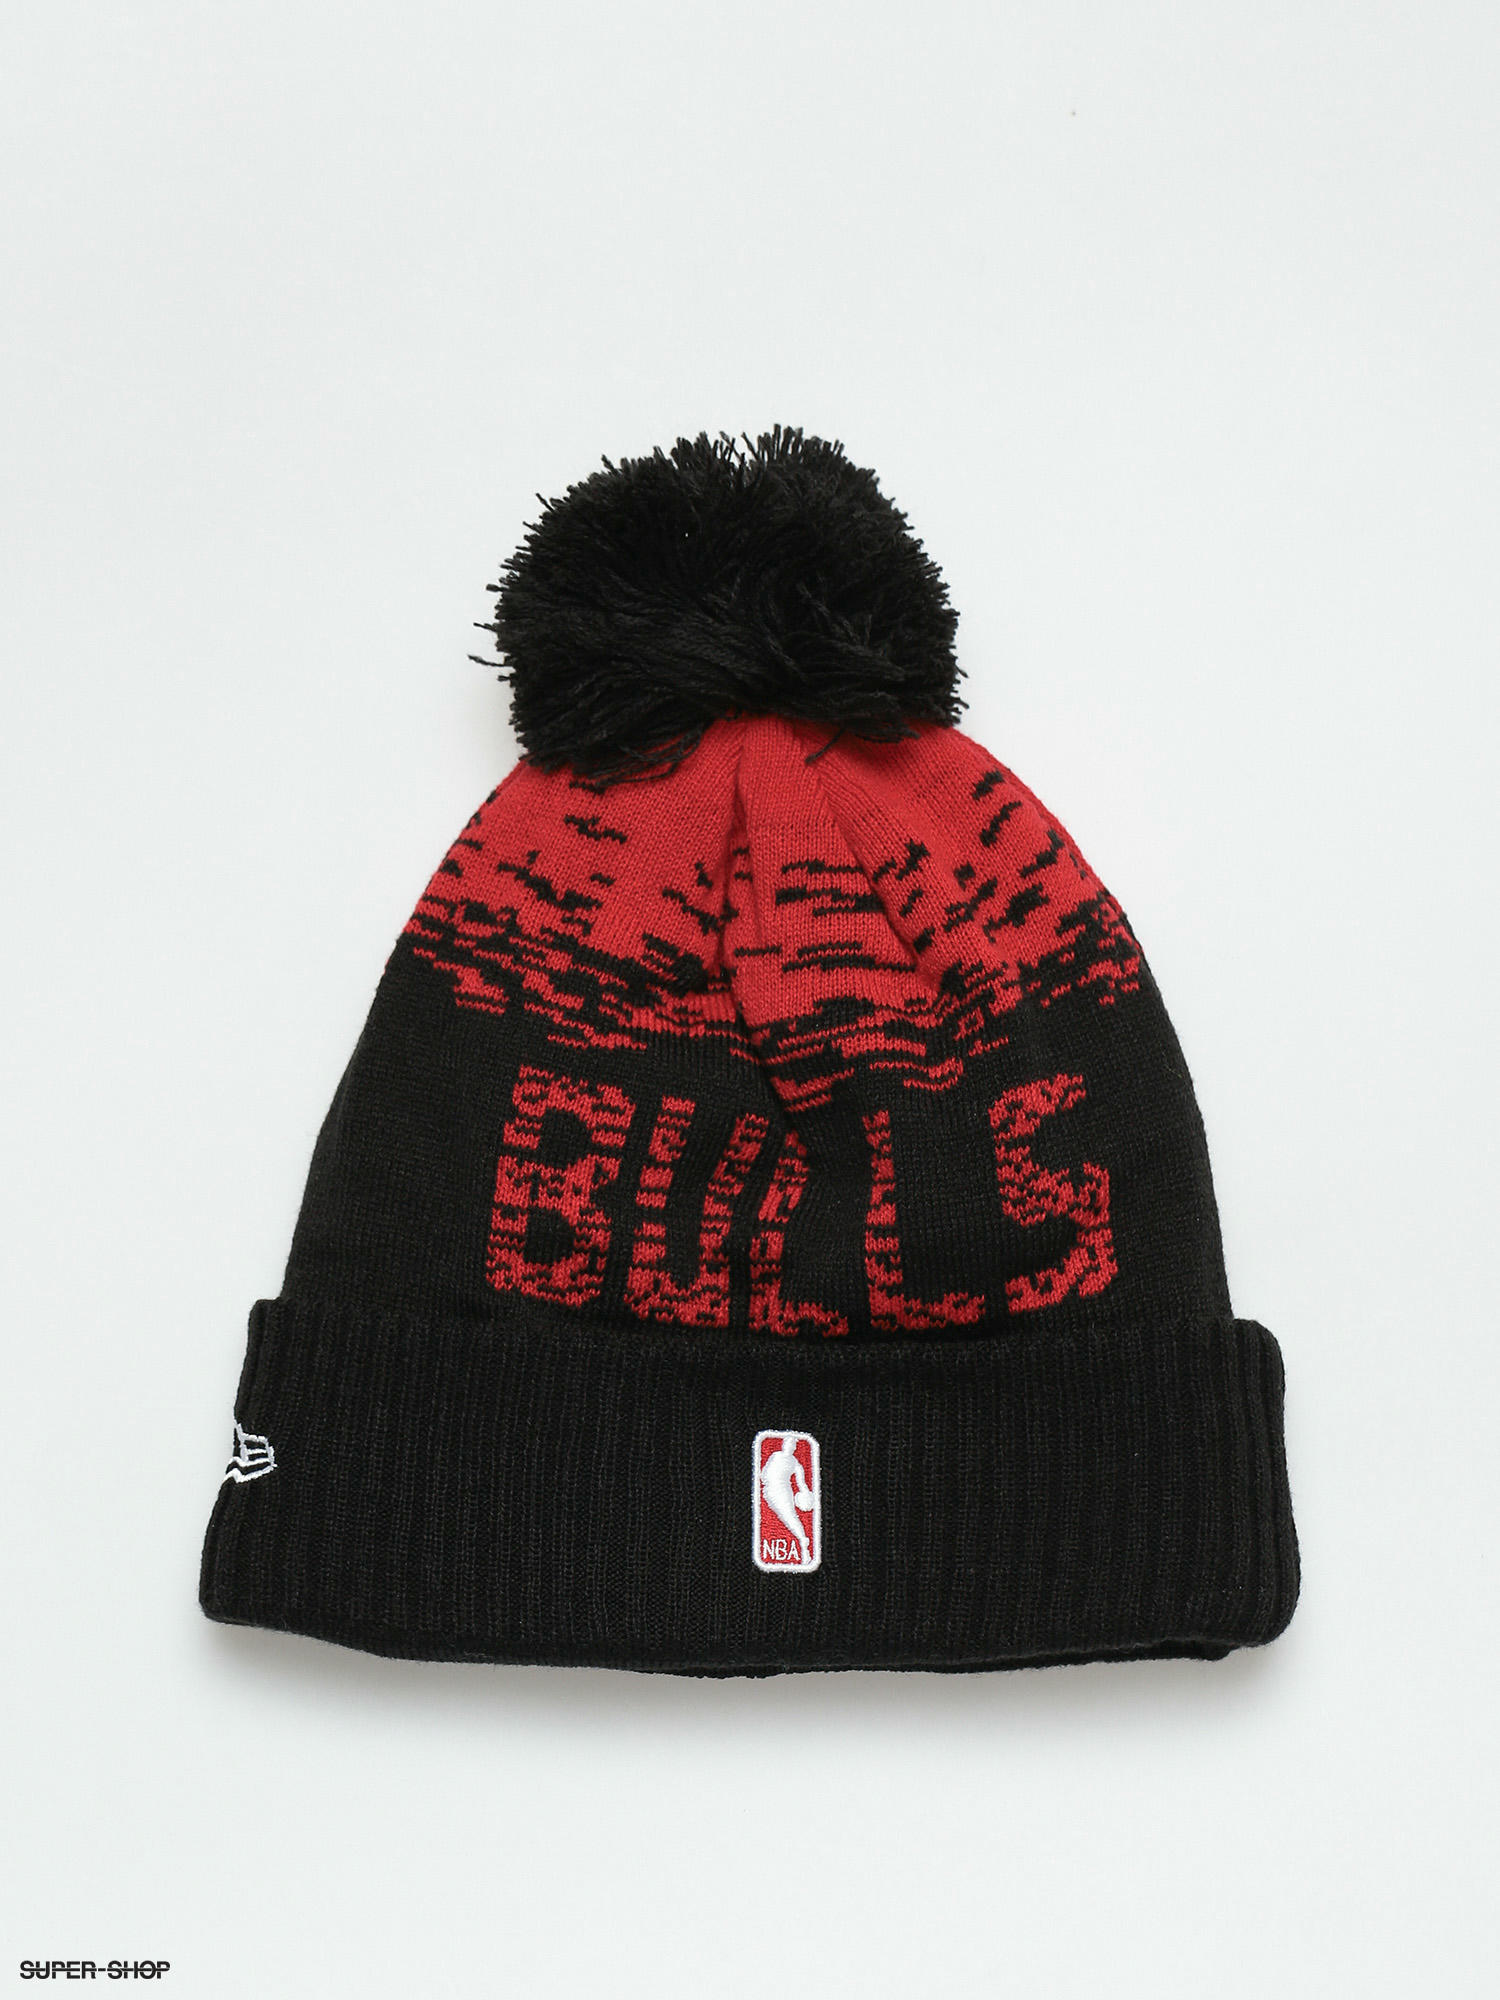 Ultra Game NBA Chicago Bulls Red/Black Cuffed Knit Beanie Hat with Pom